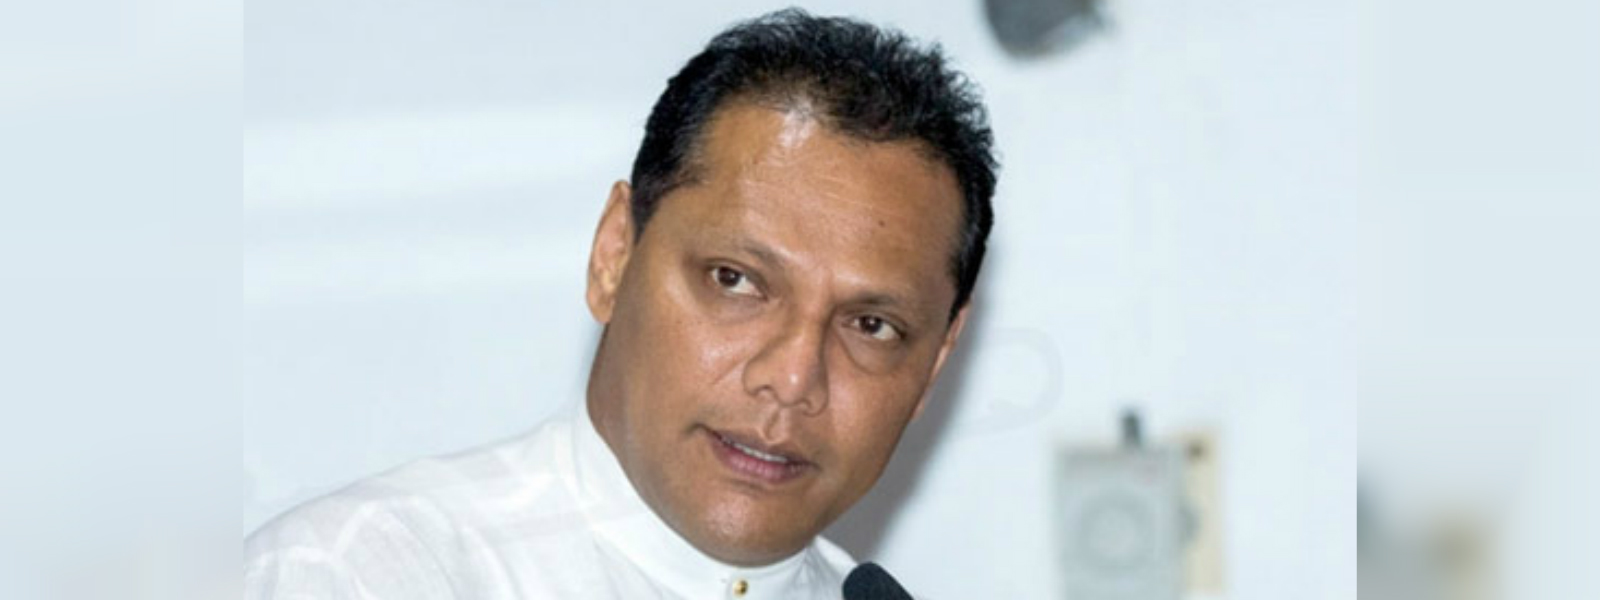 "UPFA will field a presidential candidate"